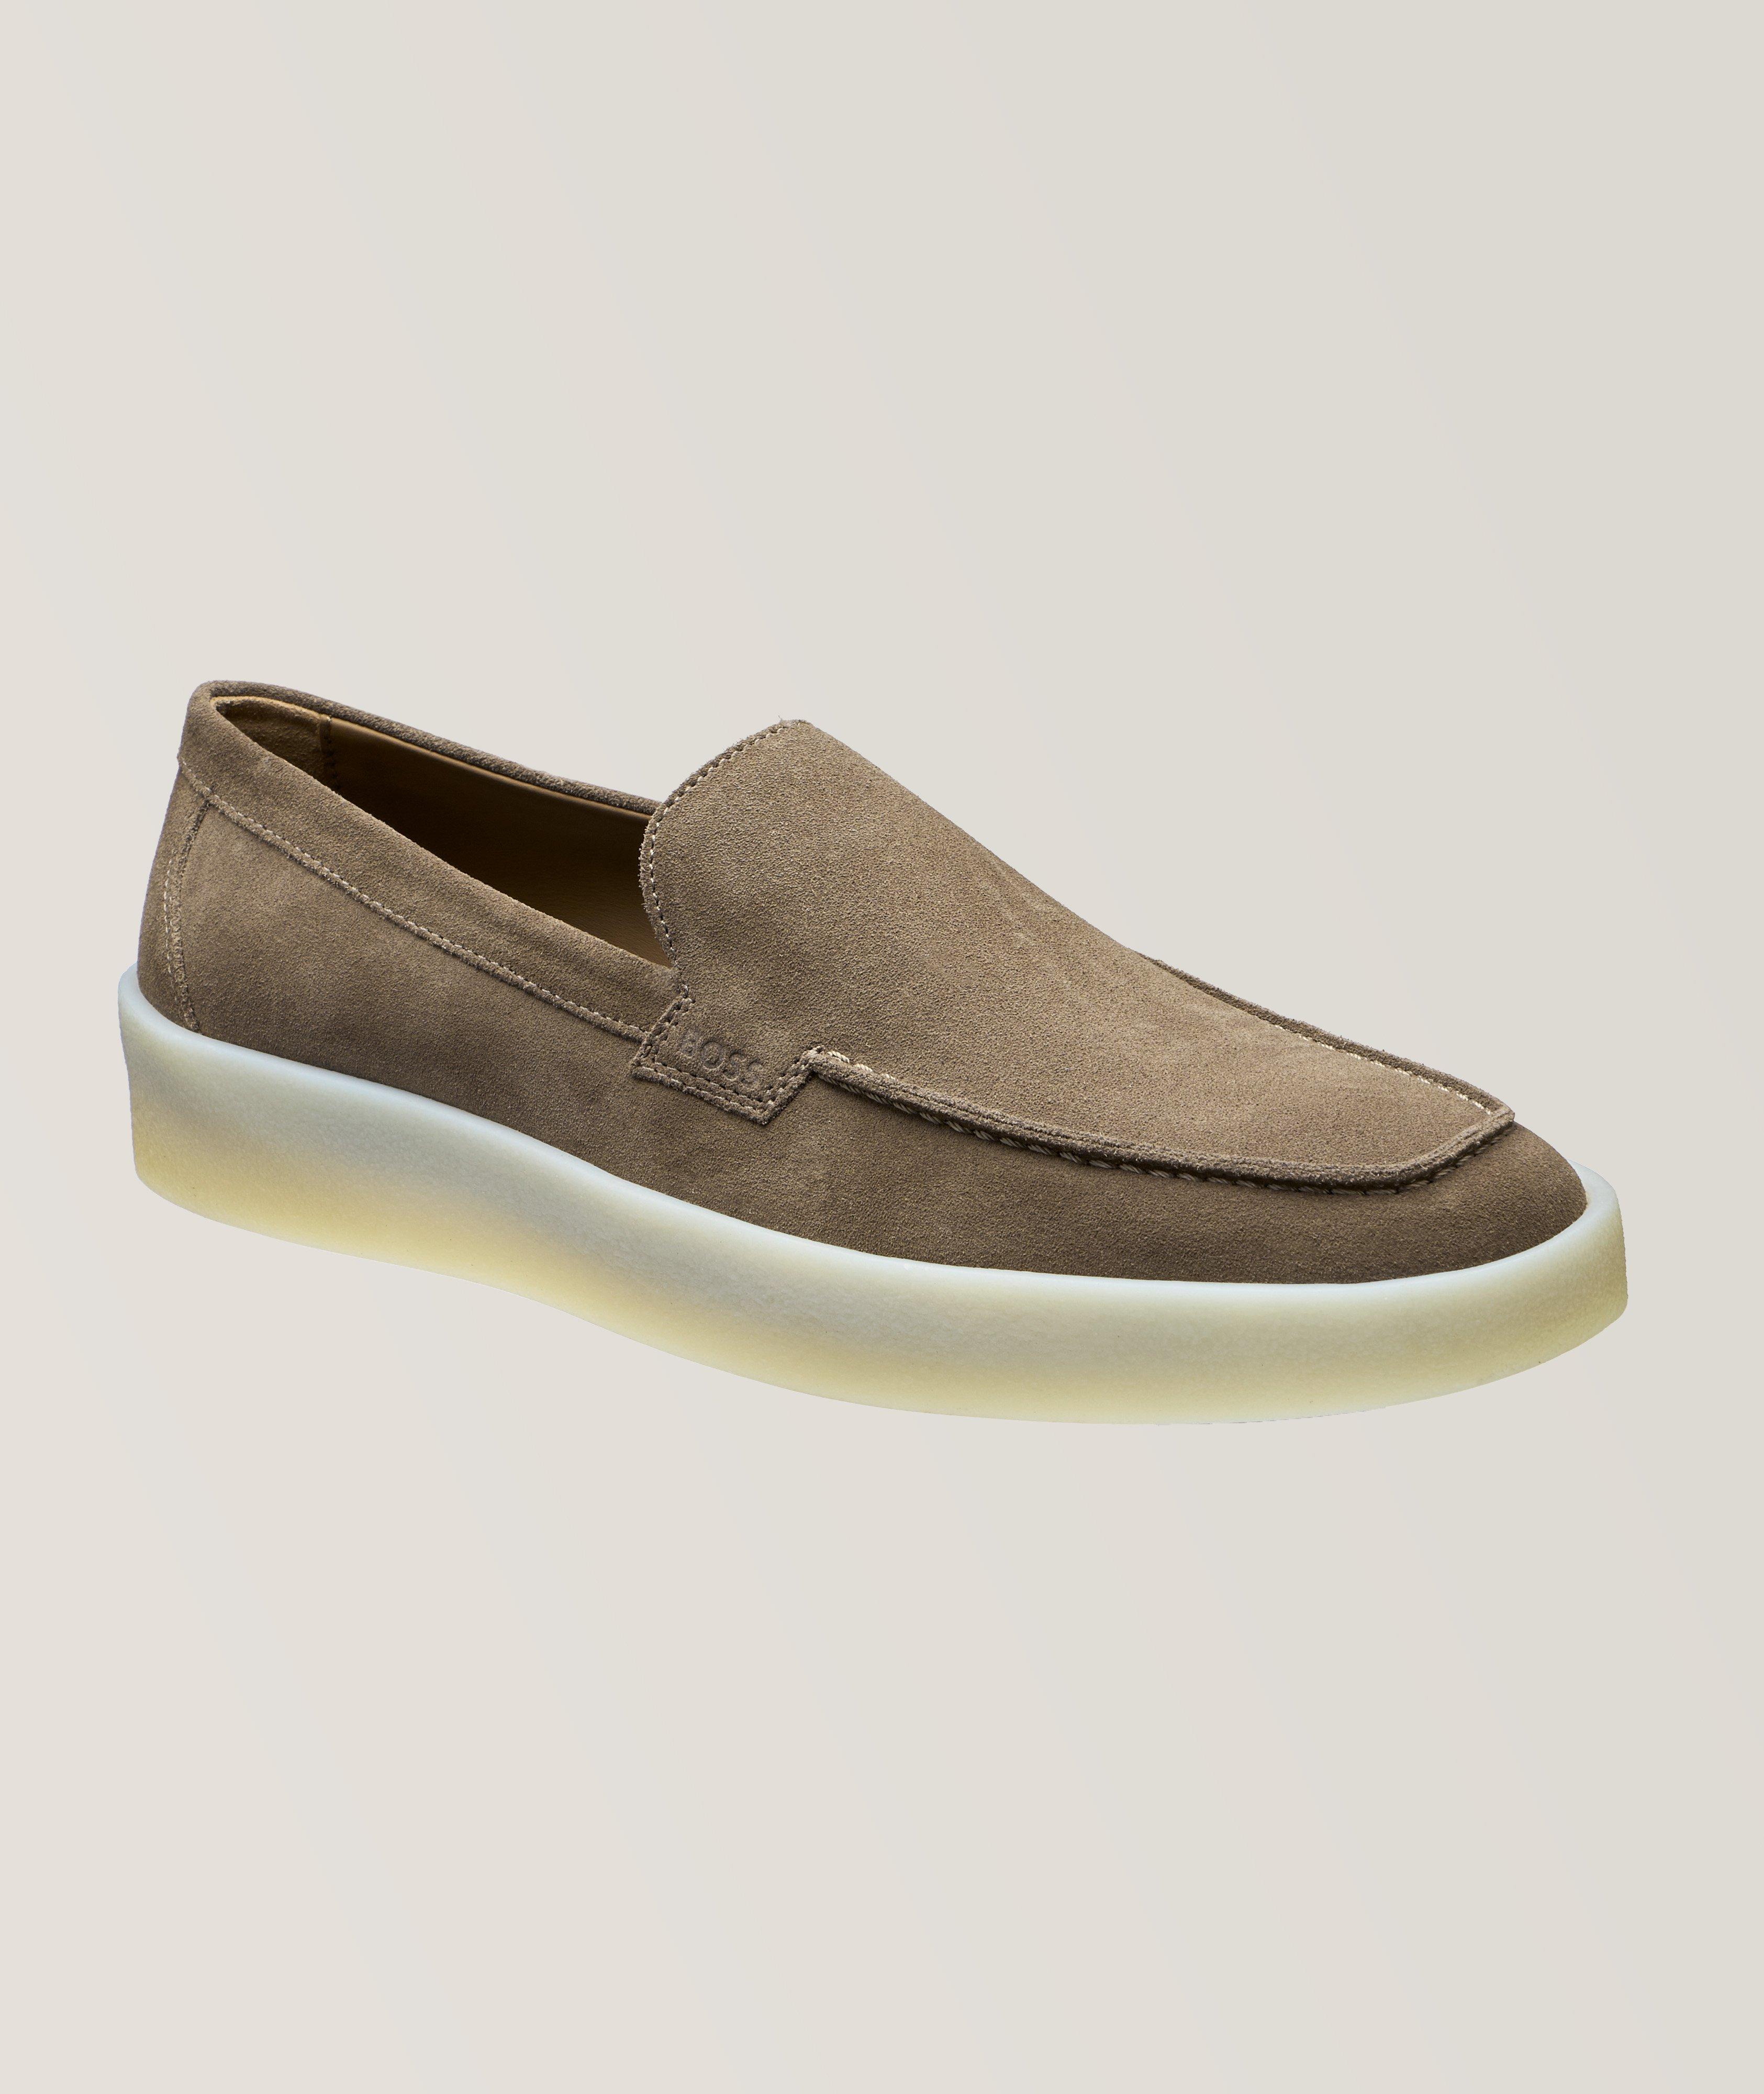 Clay Suede Loafers image 0